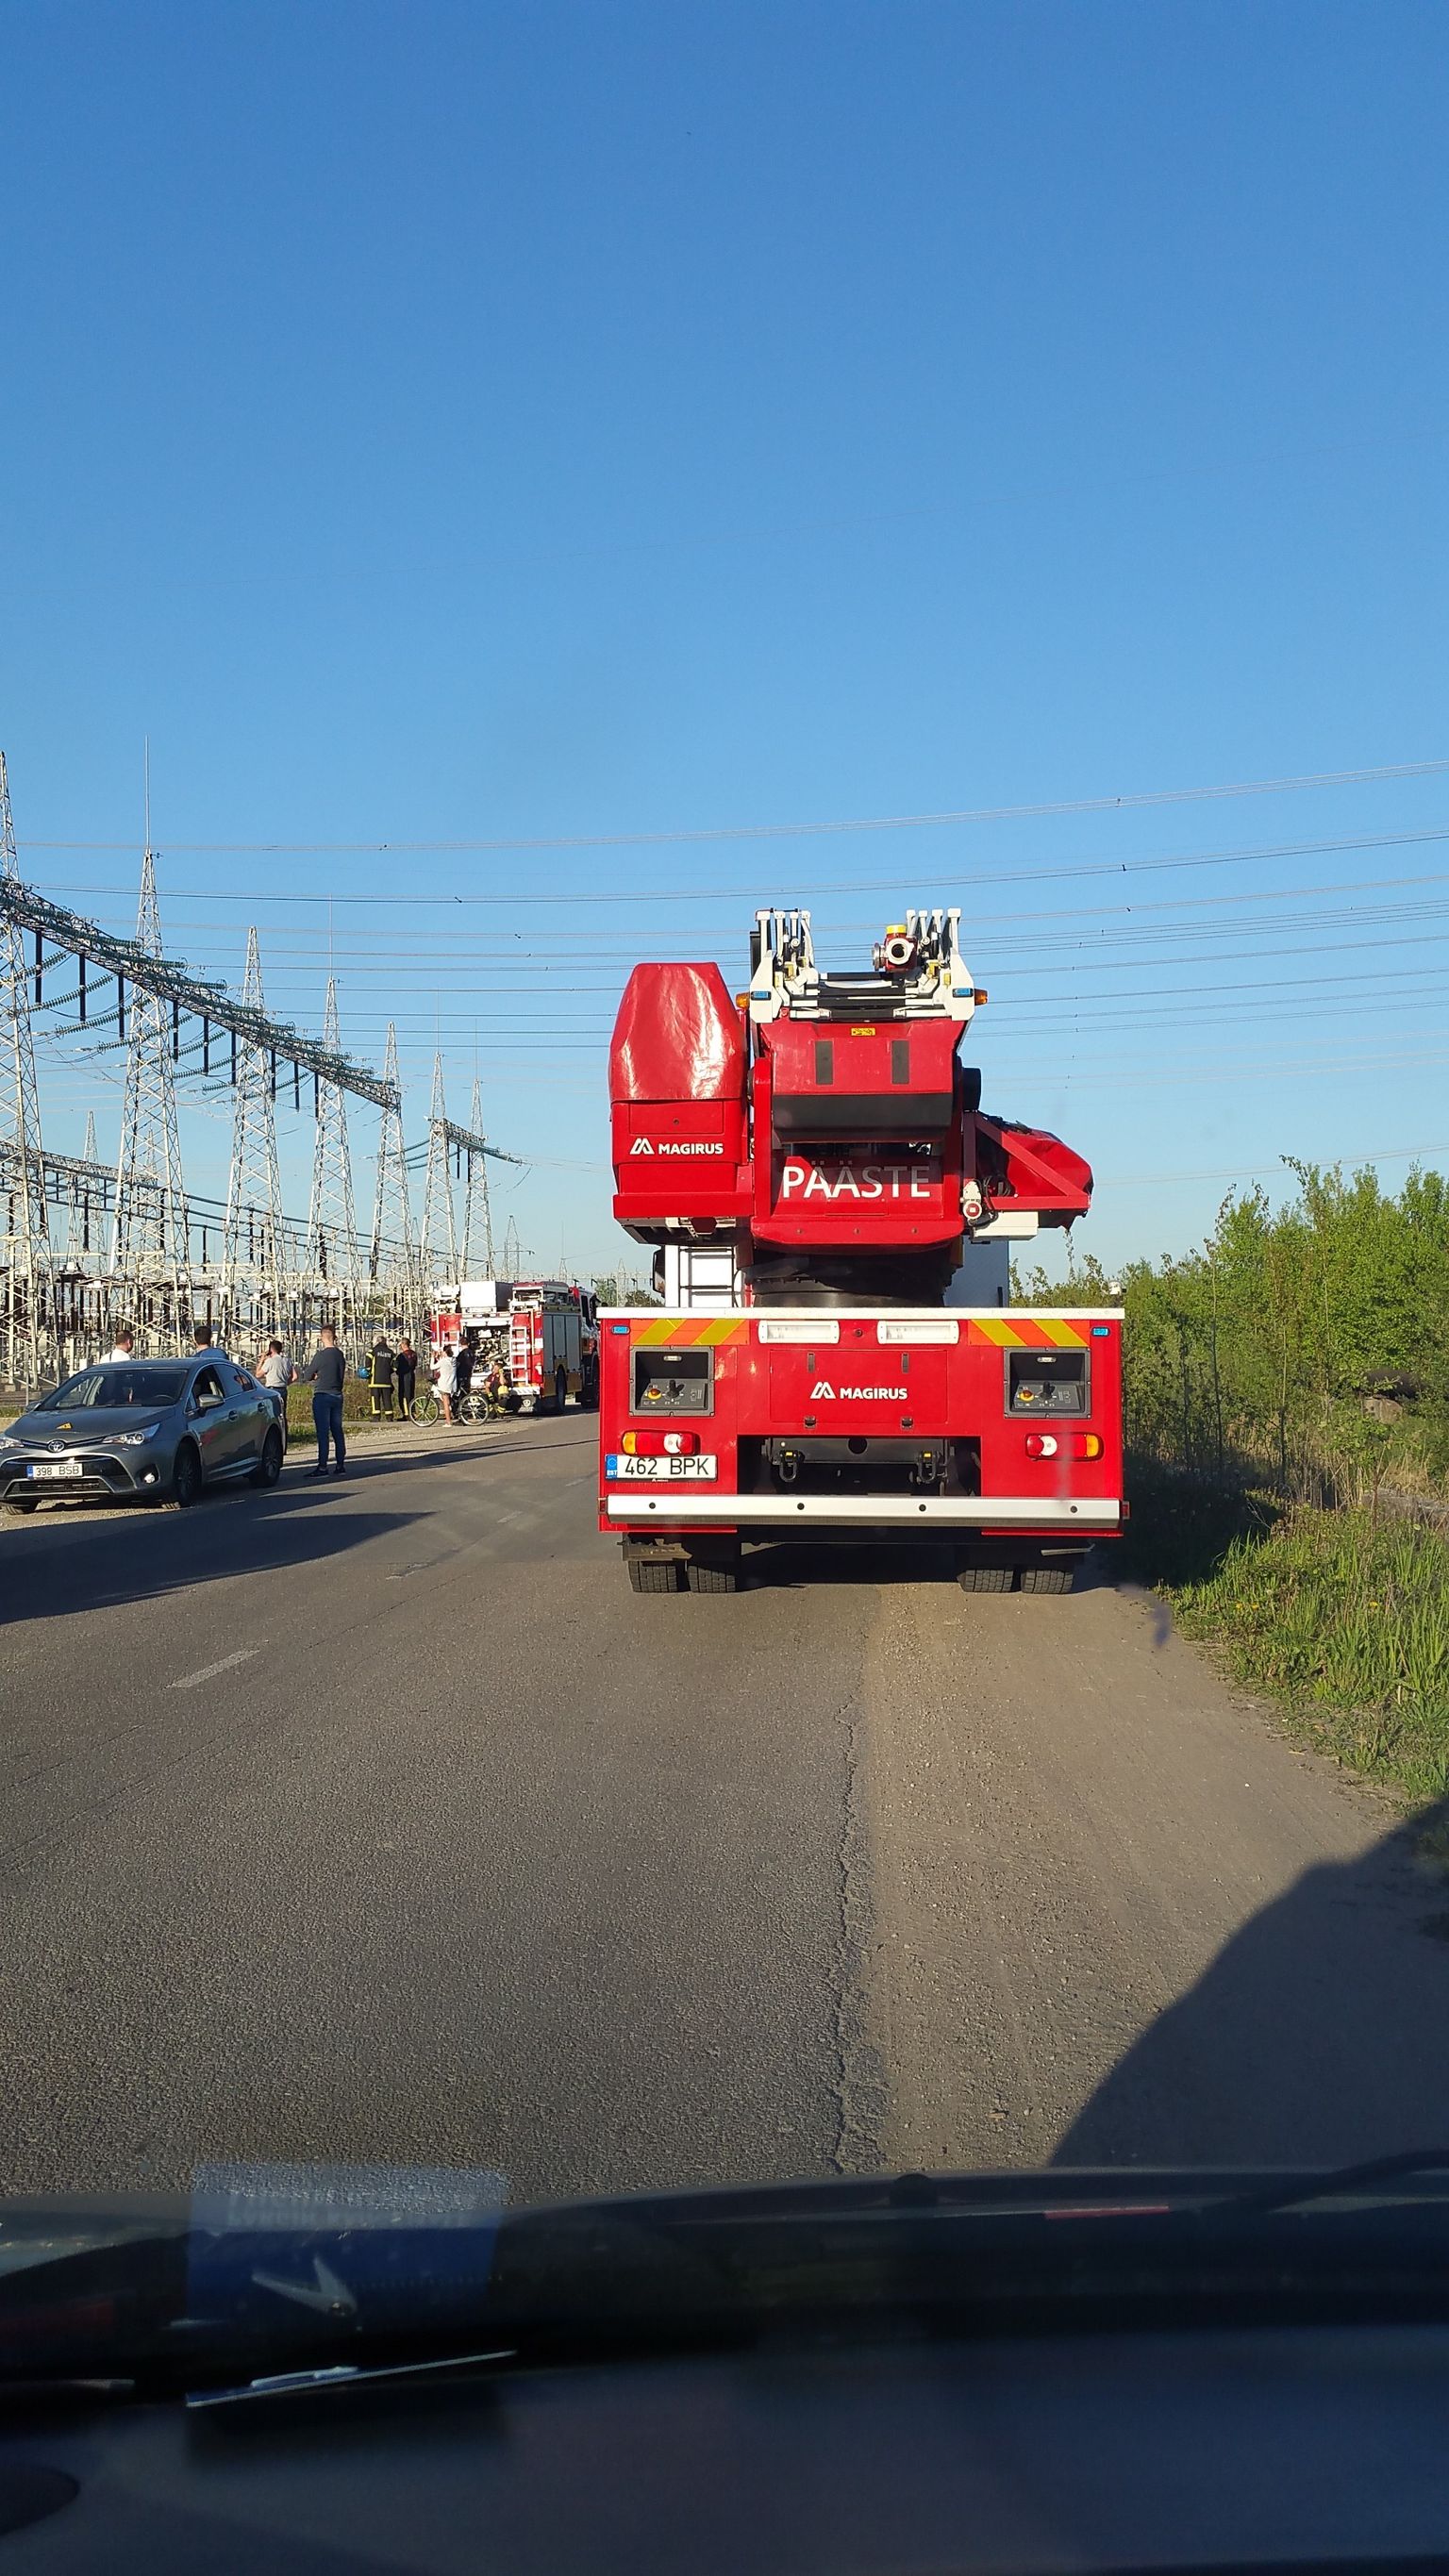 The outage was caused by a broken power transformer and a fire likely caused by a short at an Elering substation.